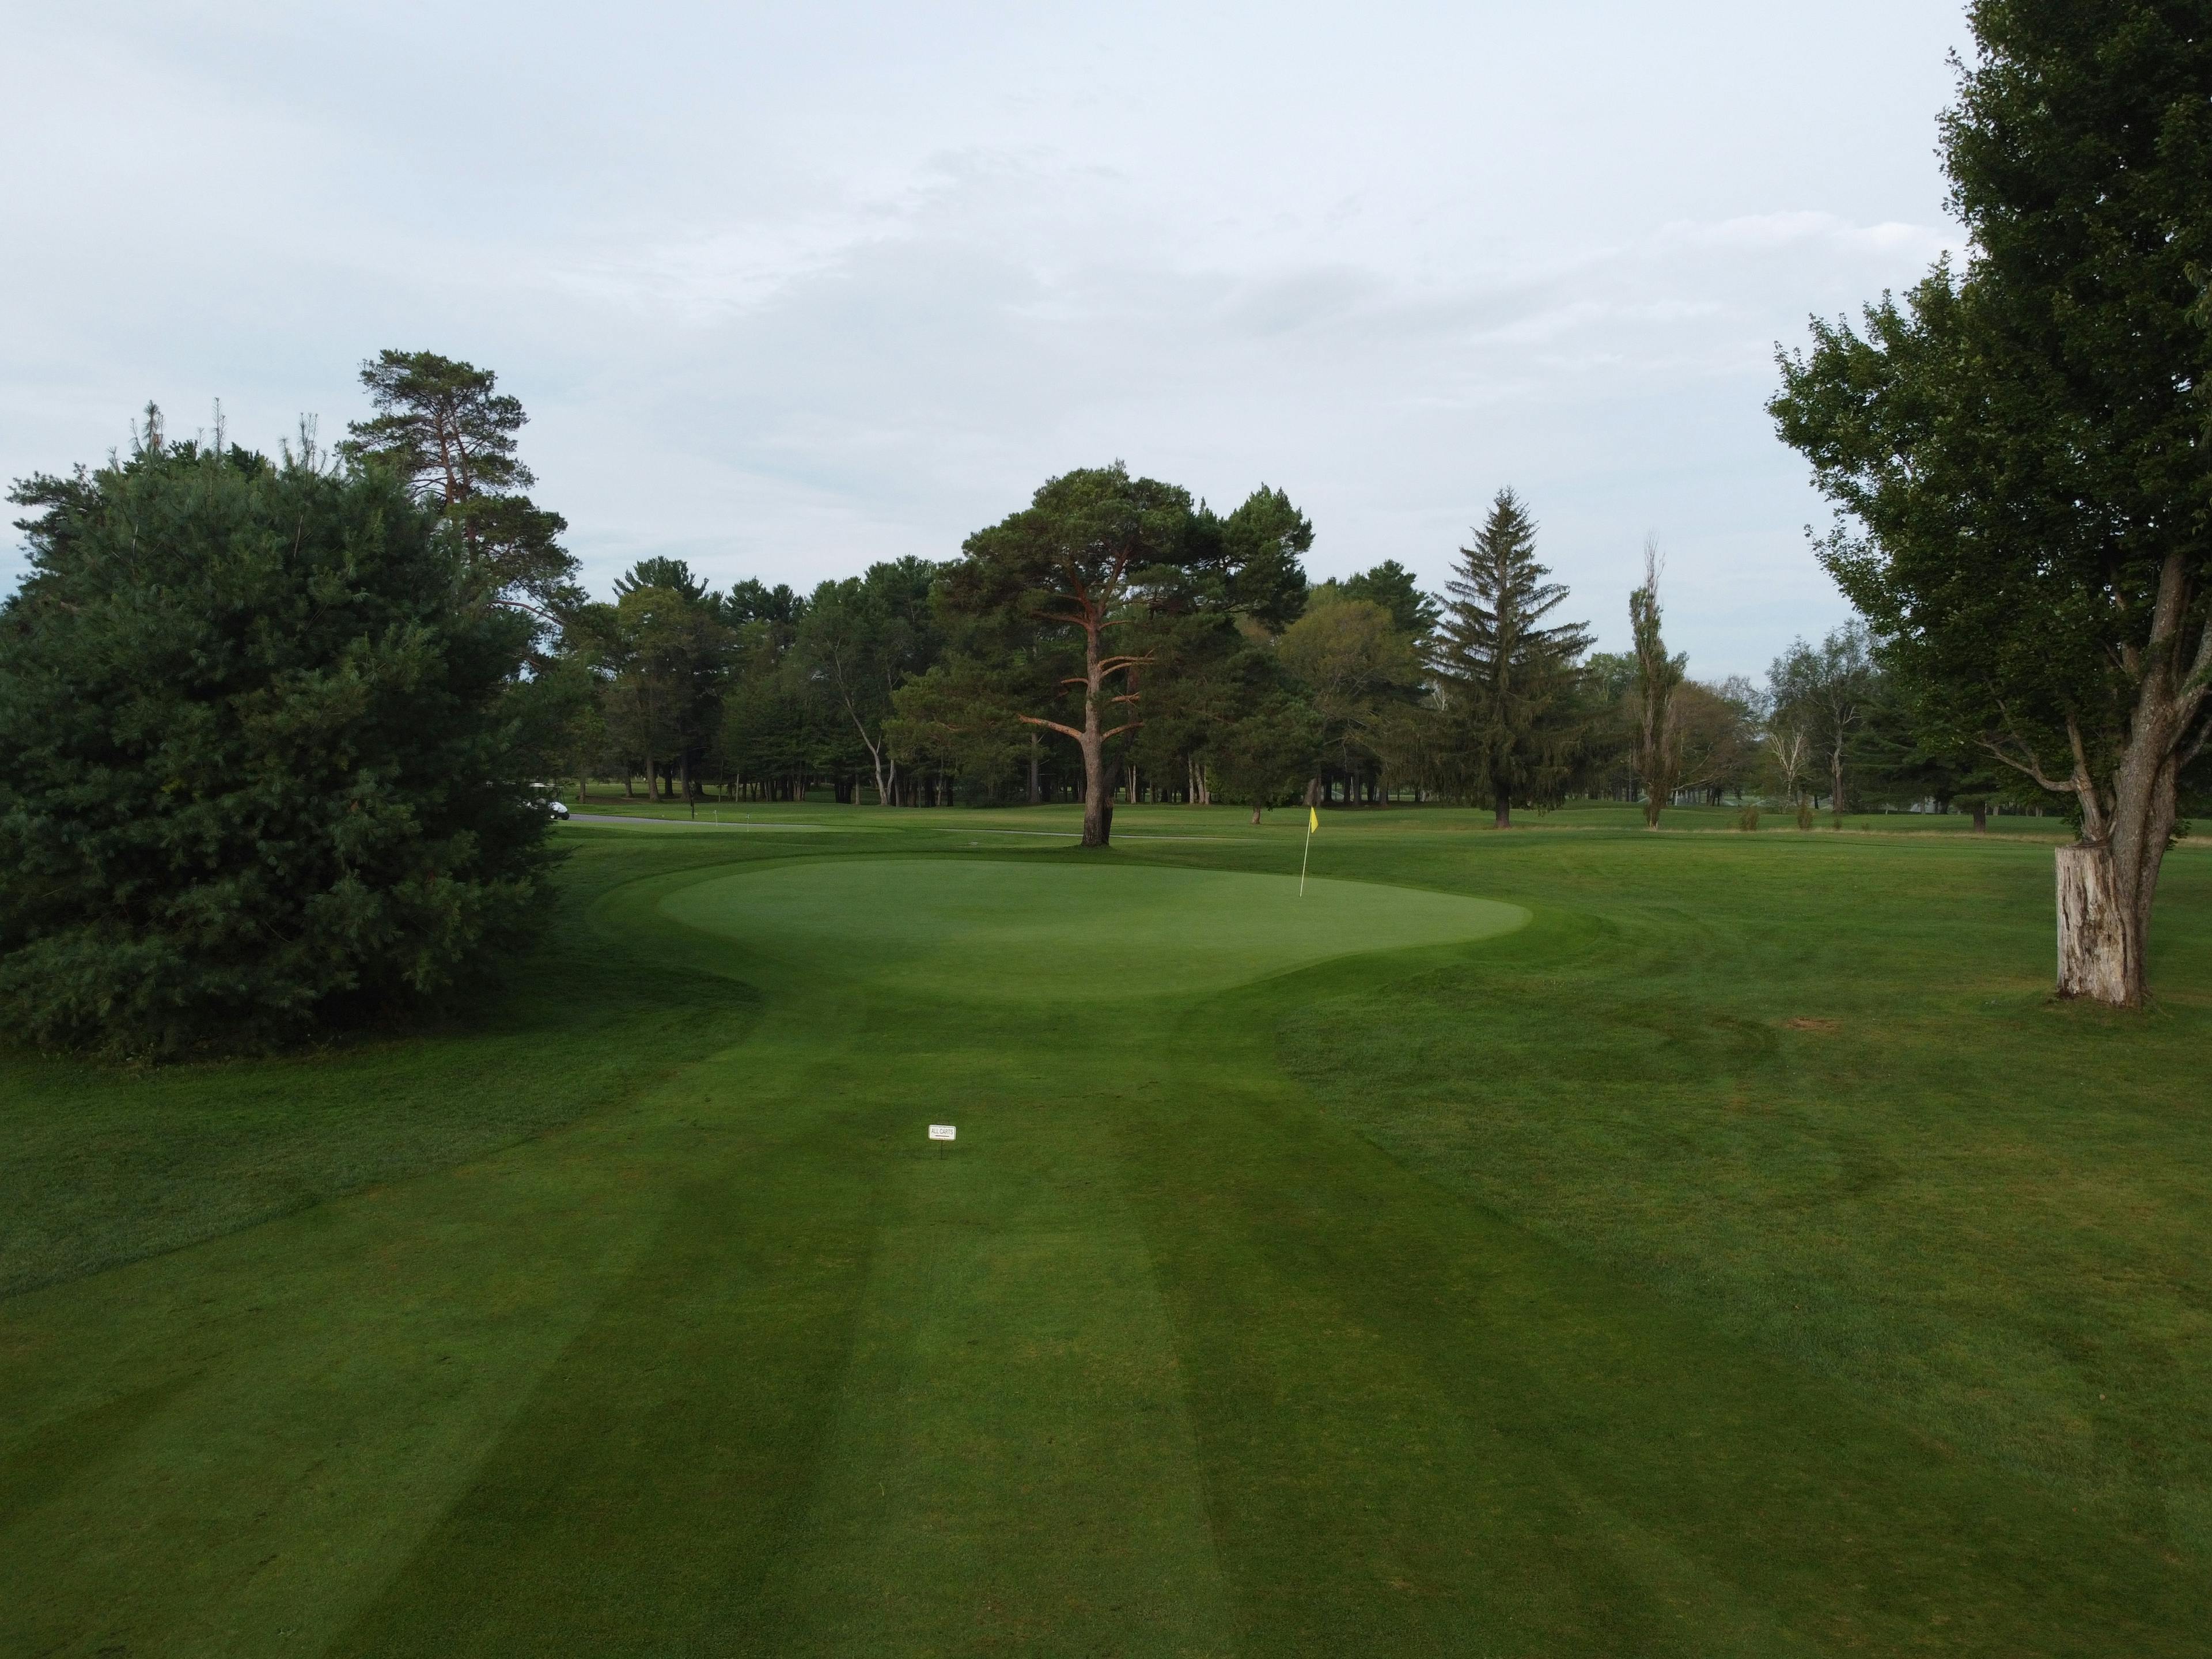 Hole number 7 on the North course